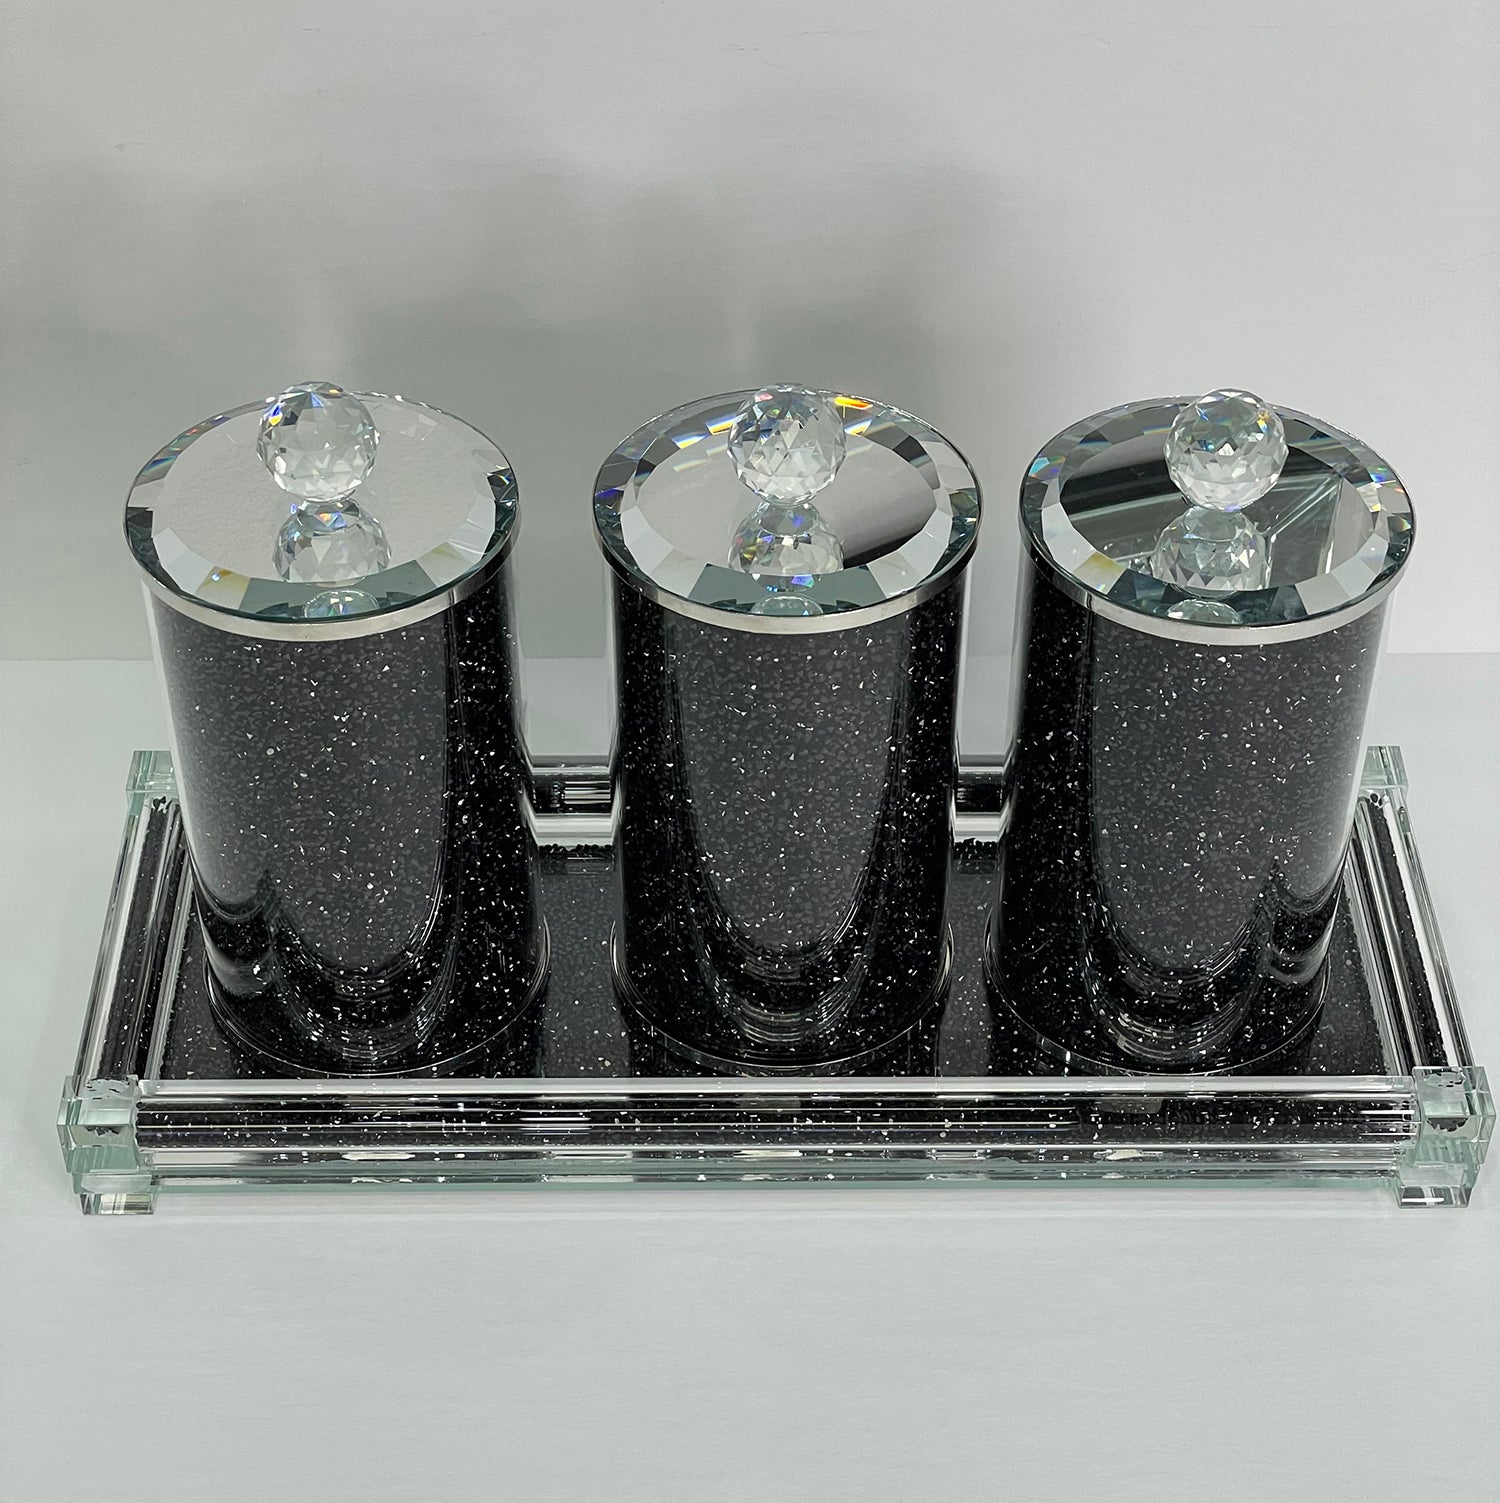 Ambrose Exquisite Three Glass Canister with Tray in black-glass